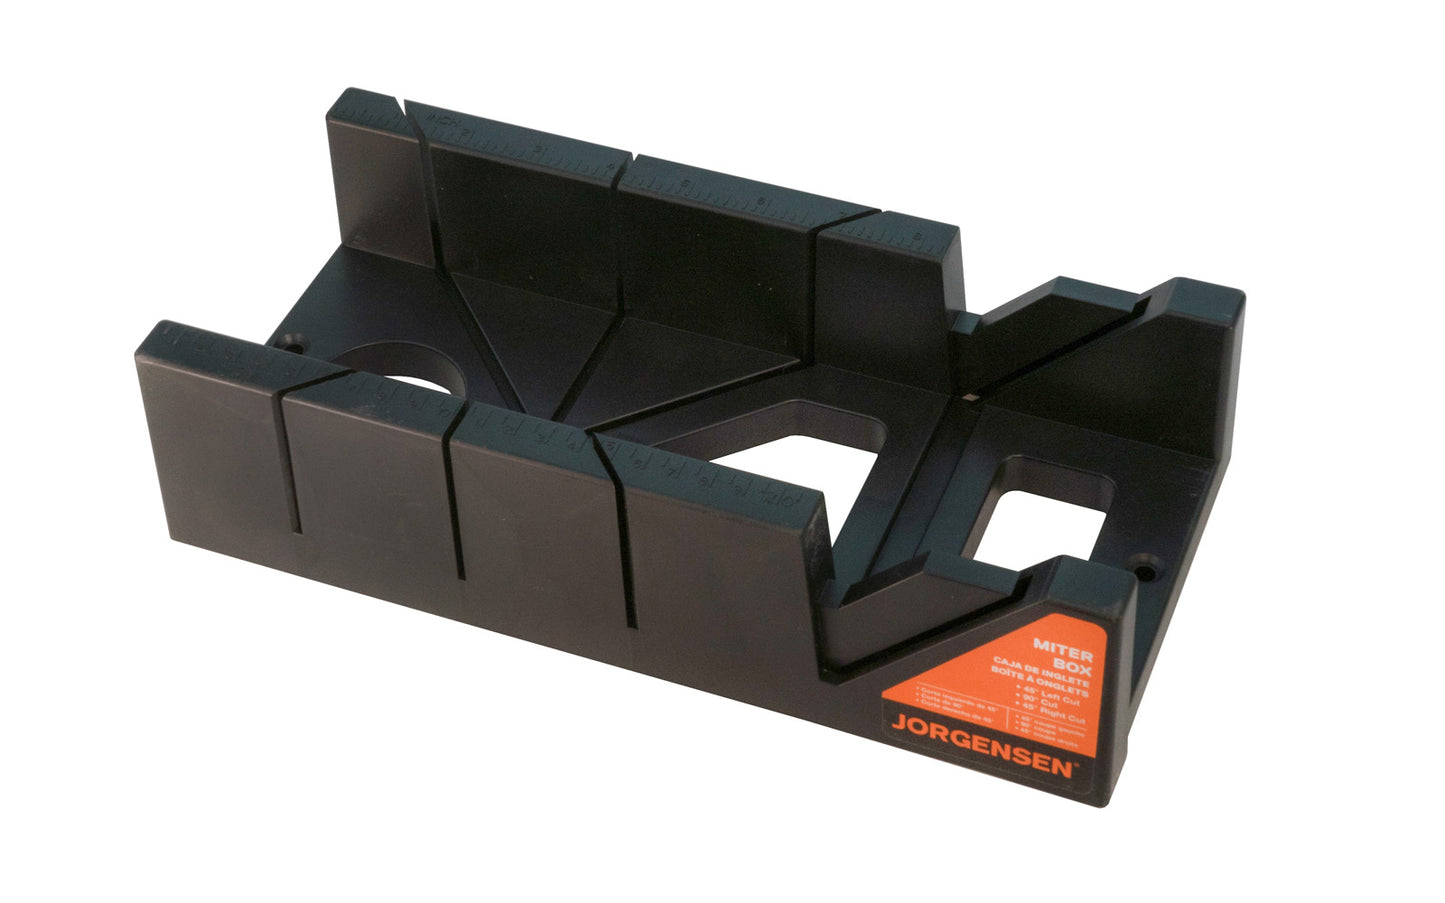 Jorgensen Miter Box · Model 60112 ~ Cuts mitres on 45° & 90° angles ~ Holes in base for fastening to workbench ~ Lightweight & simple to use for variety of projects. Miter box is made of plastic material. 044295601122. Pony Mitre Box. Open interior allows cuttings to fall through. Inside dimensions: 12" x  4" x 2-1/8"